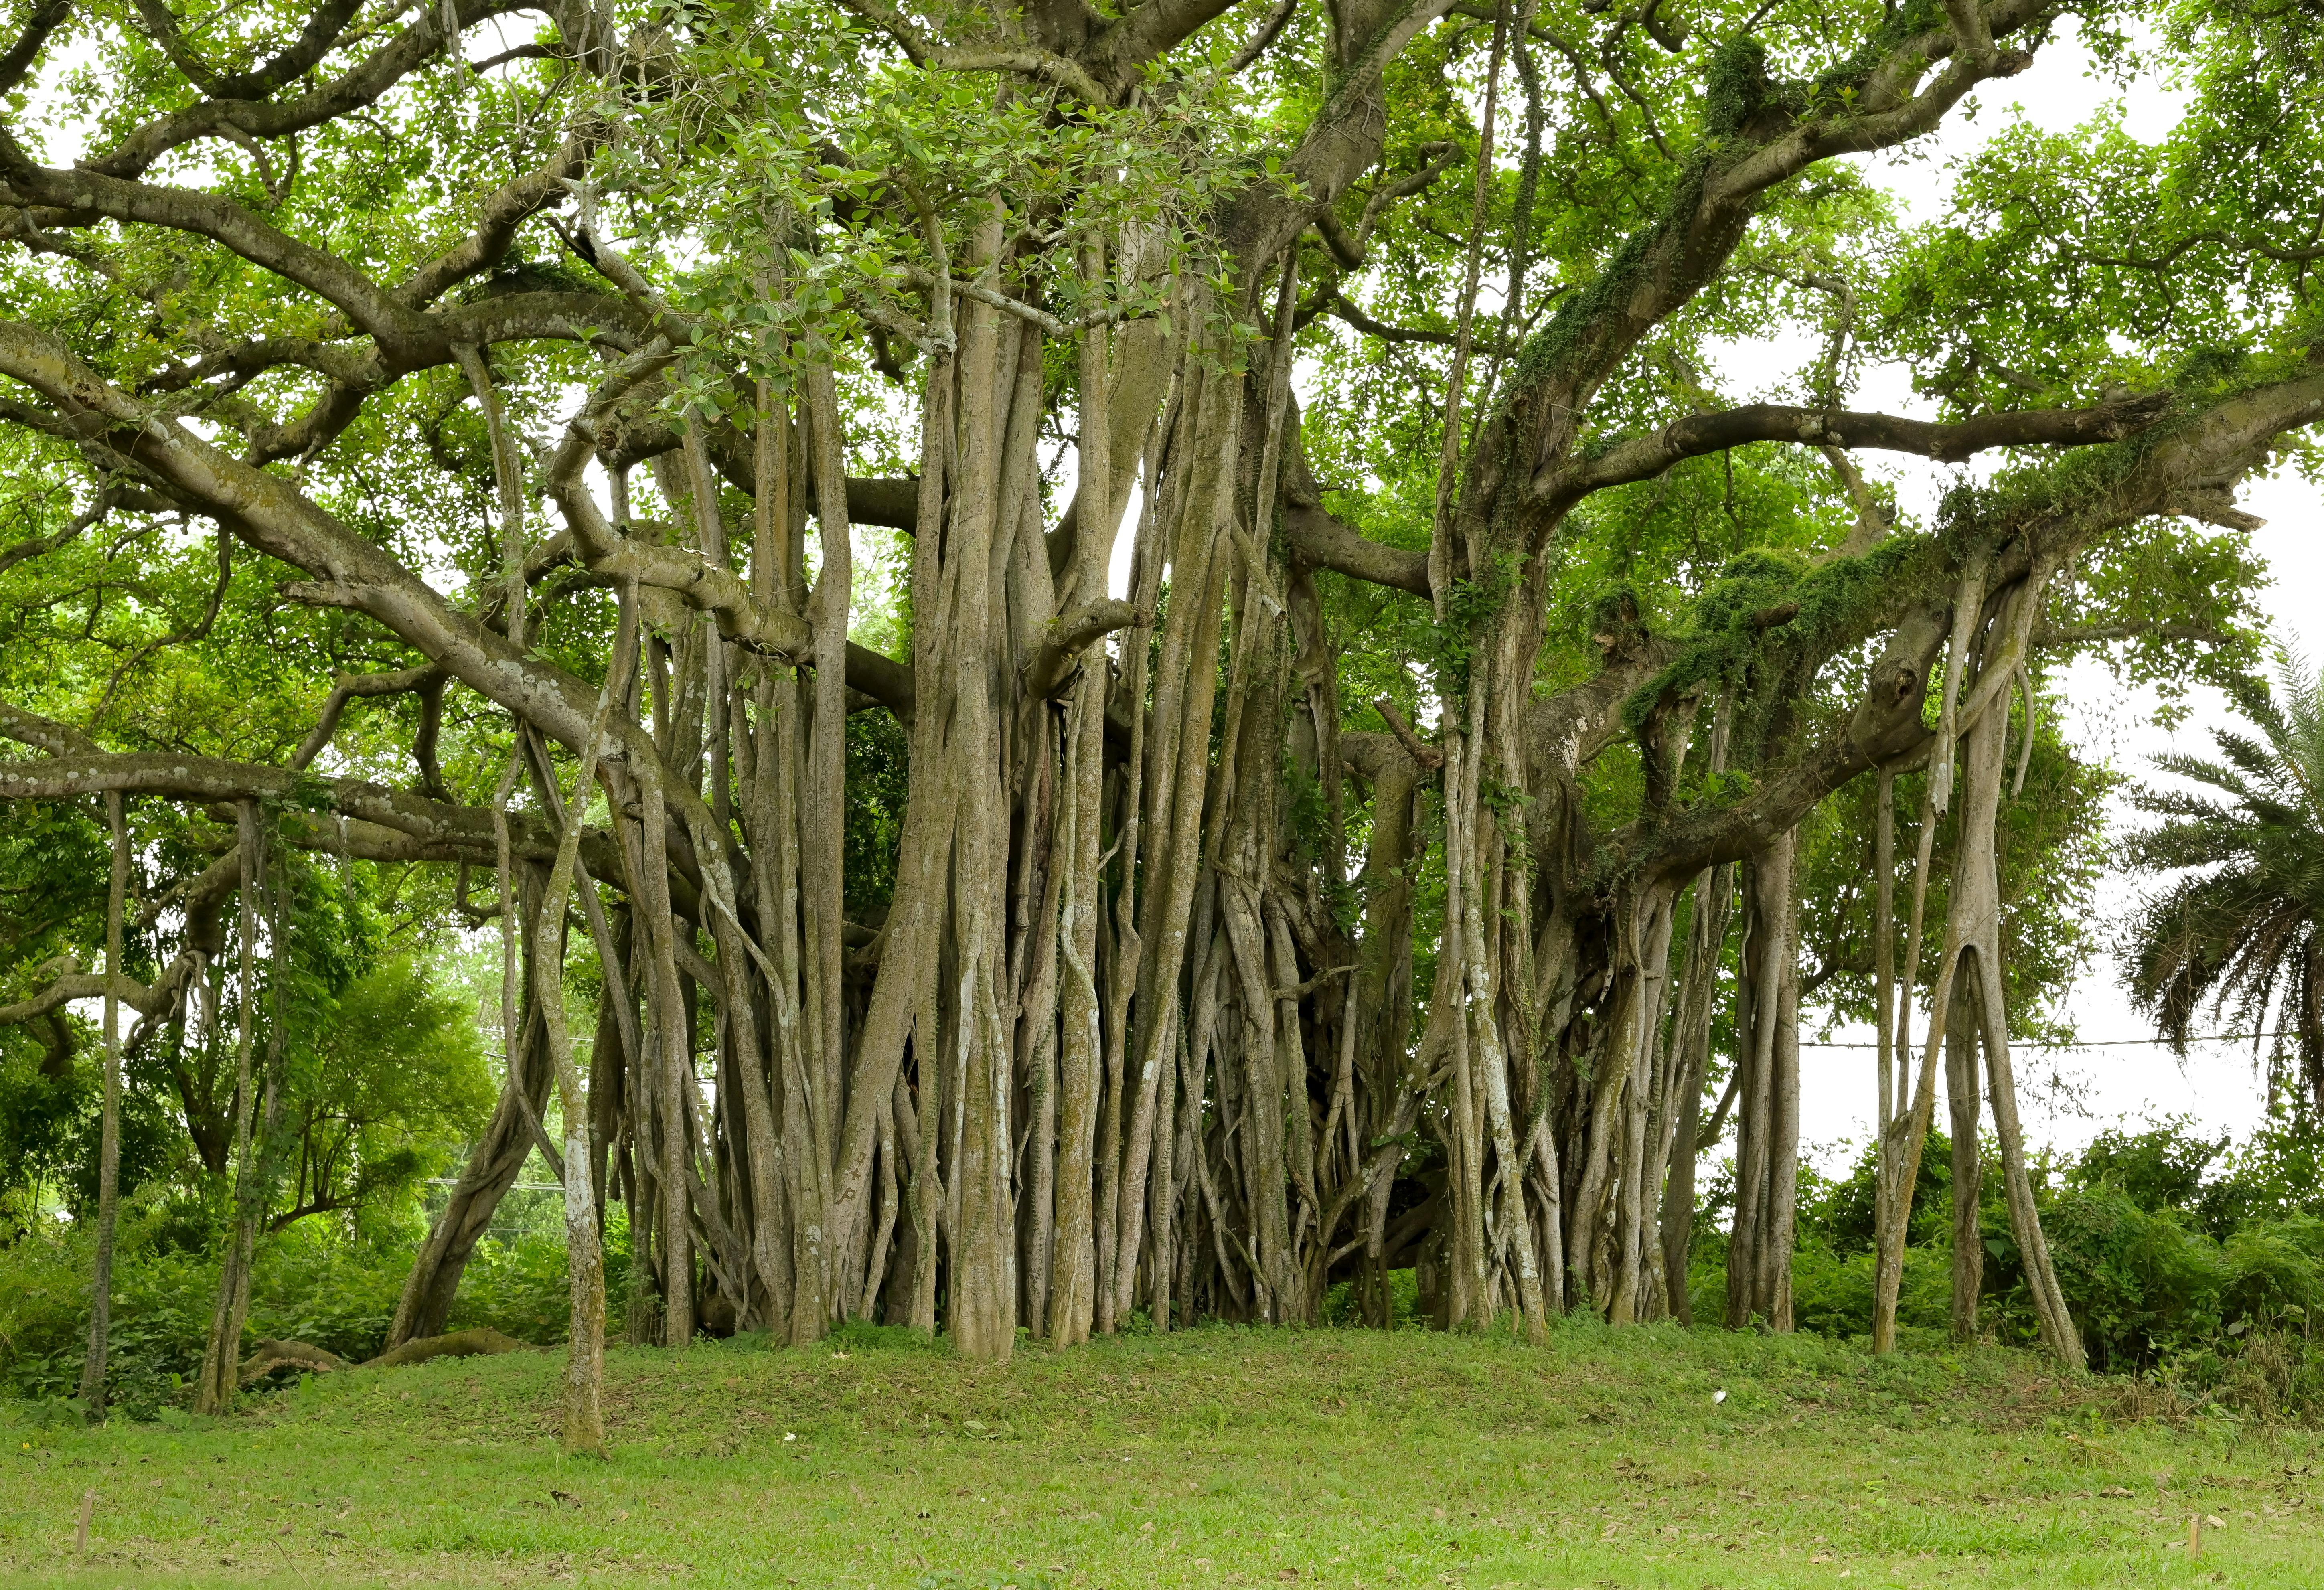 Banyan Tree With Many Branches · Free Stock Photo